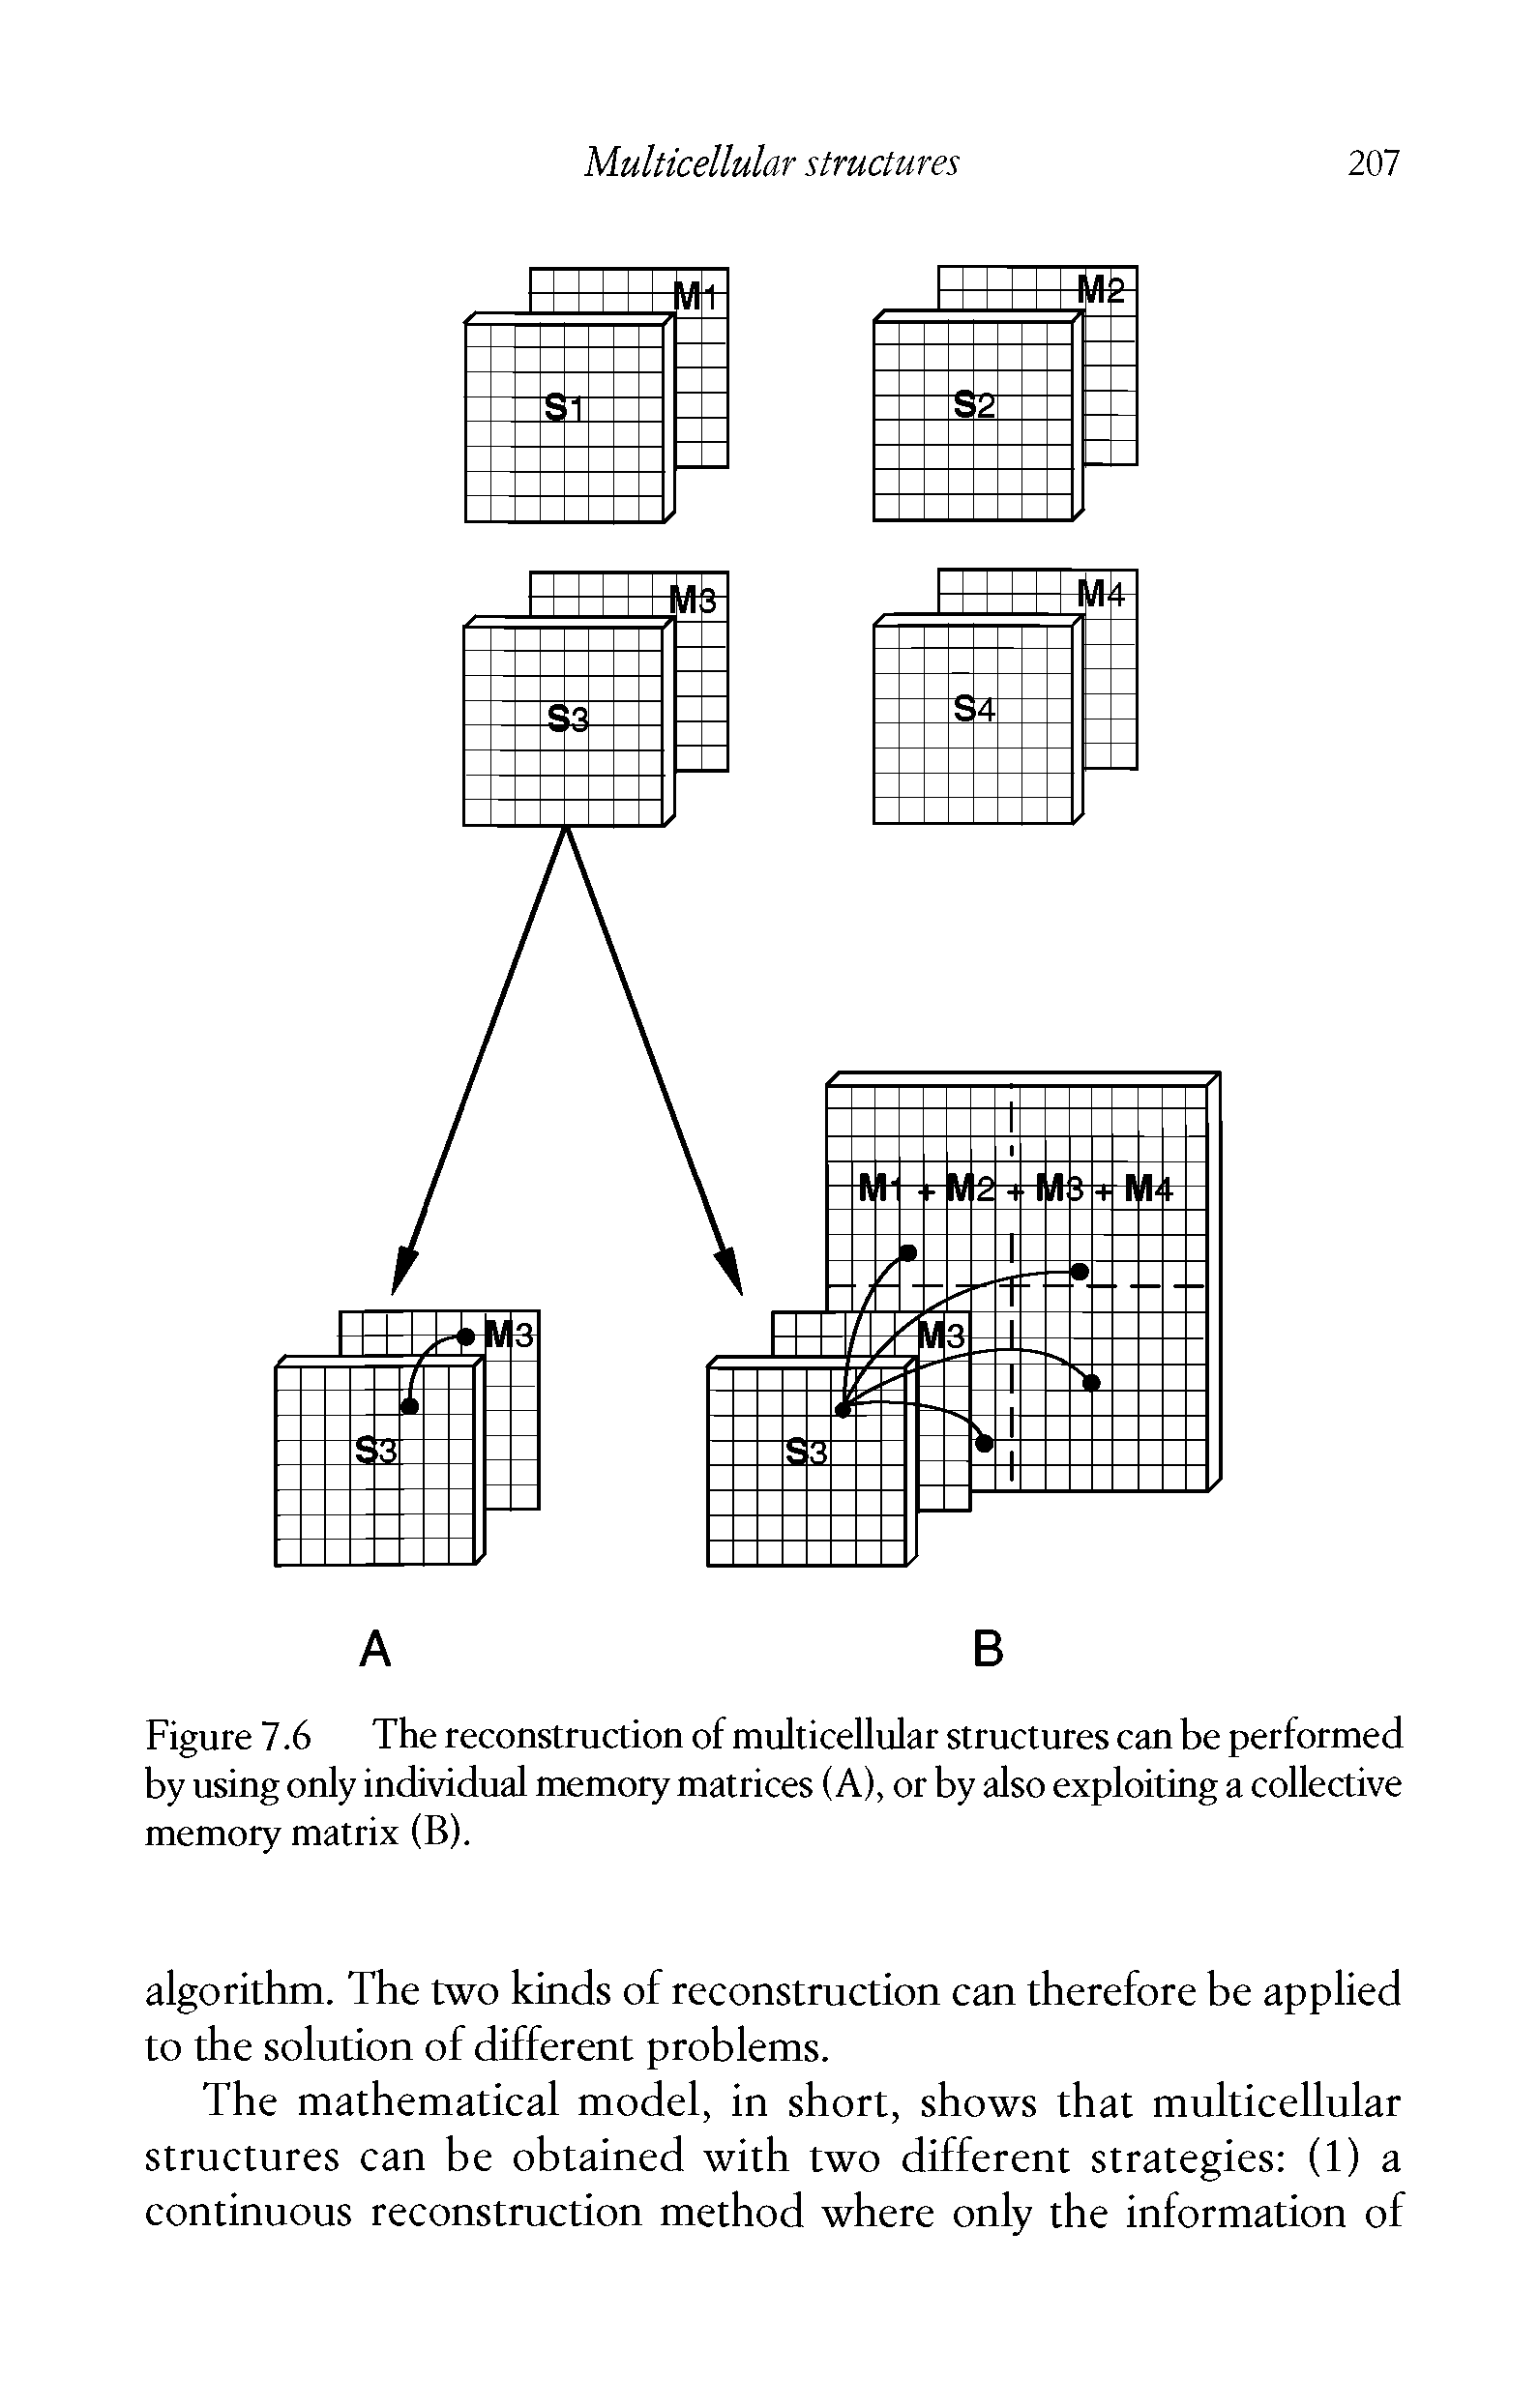 Figure 7.6 The reconstruction of multicellular structures can be performed by using only individual memory matrices (A), or by also exploiting a collective memory matrix (B).